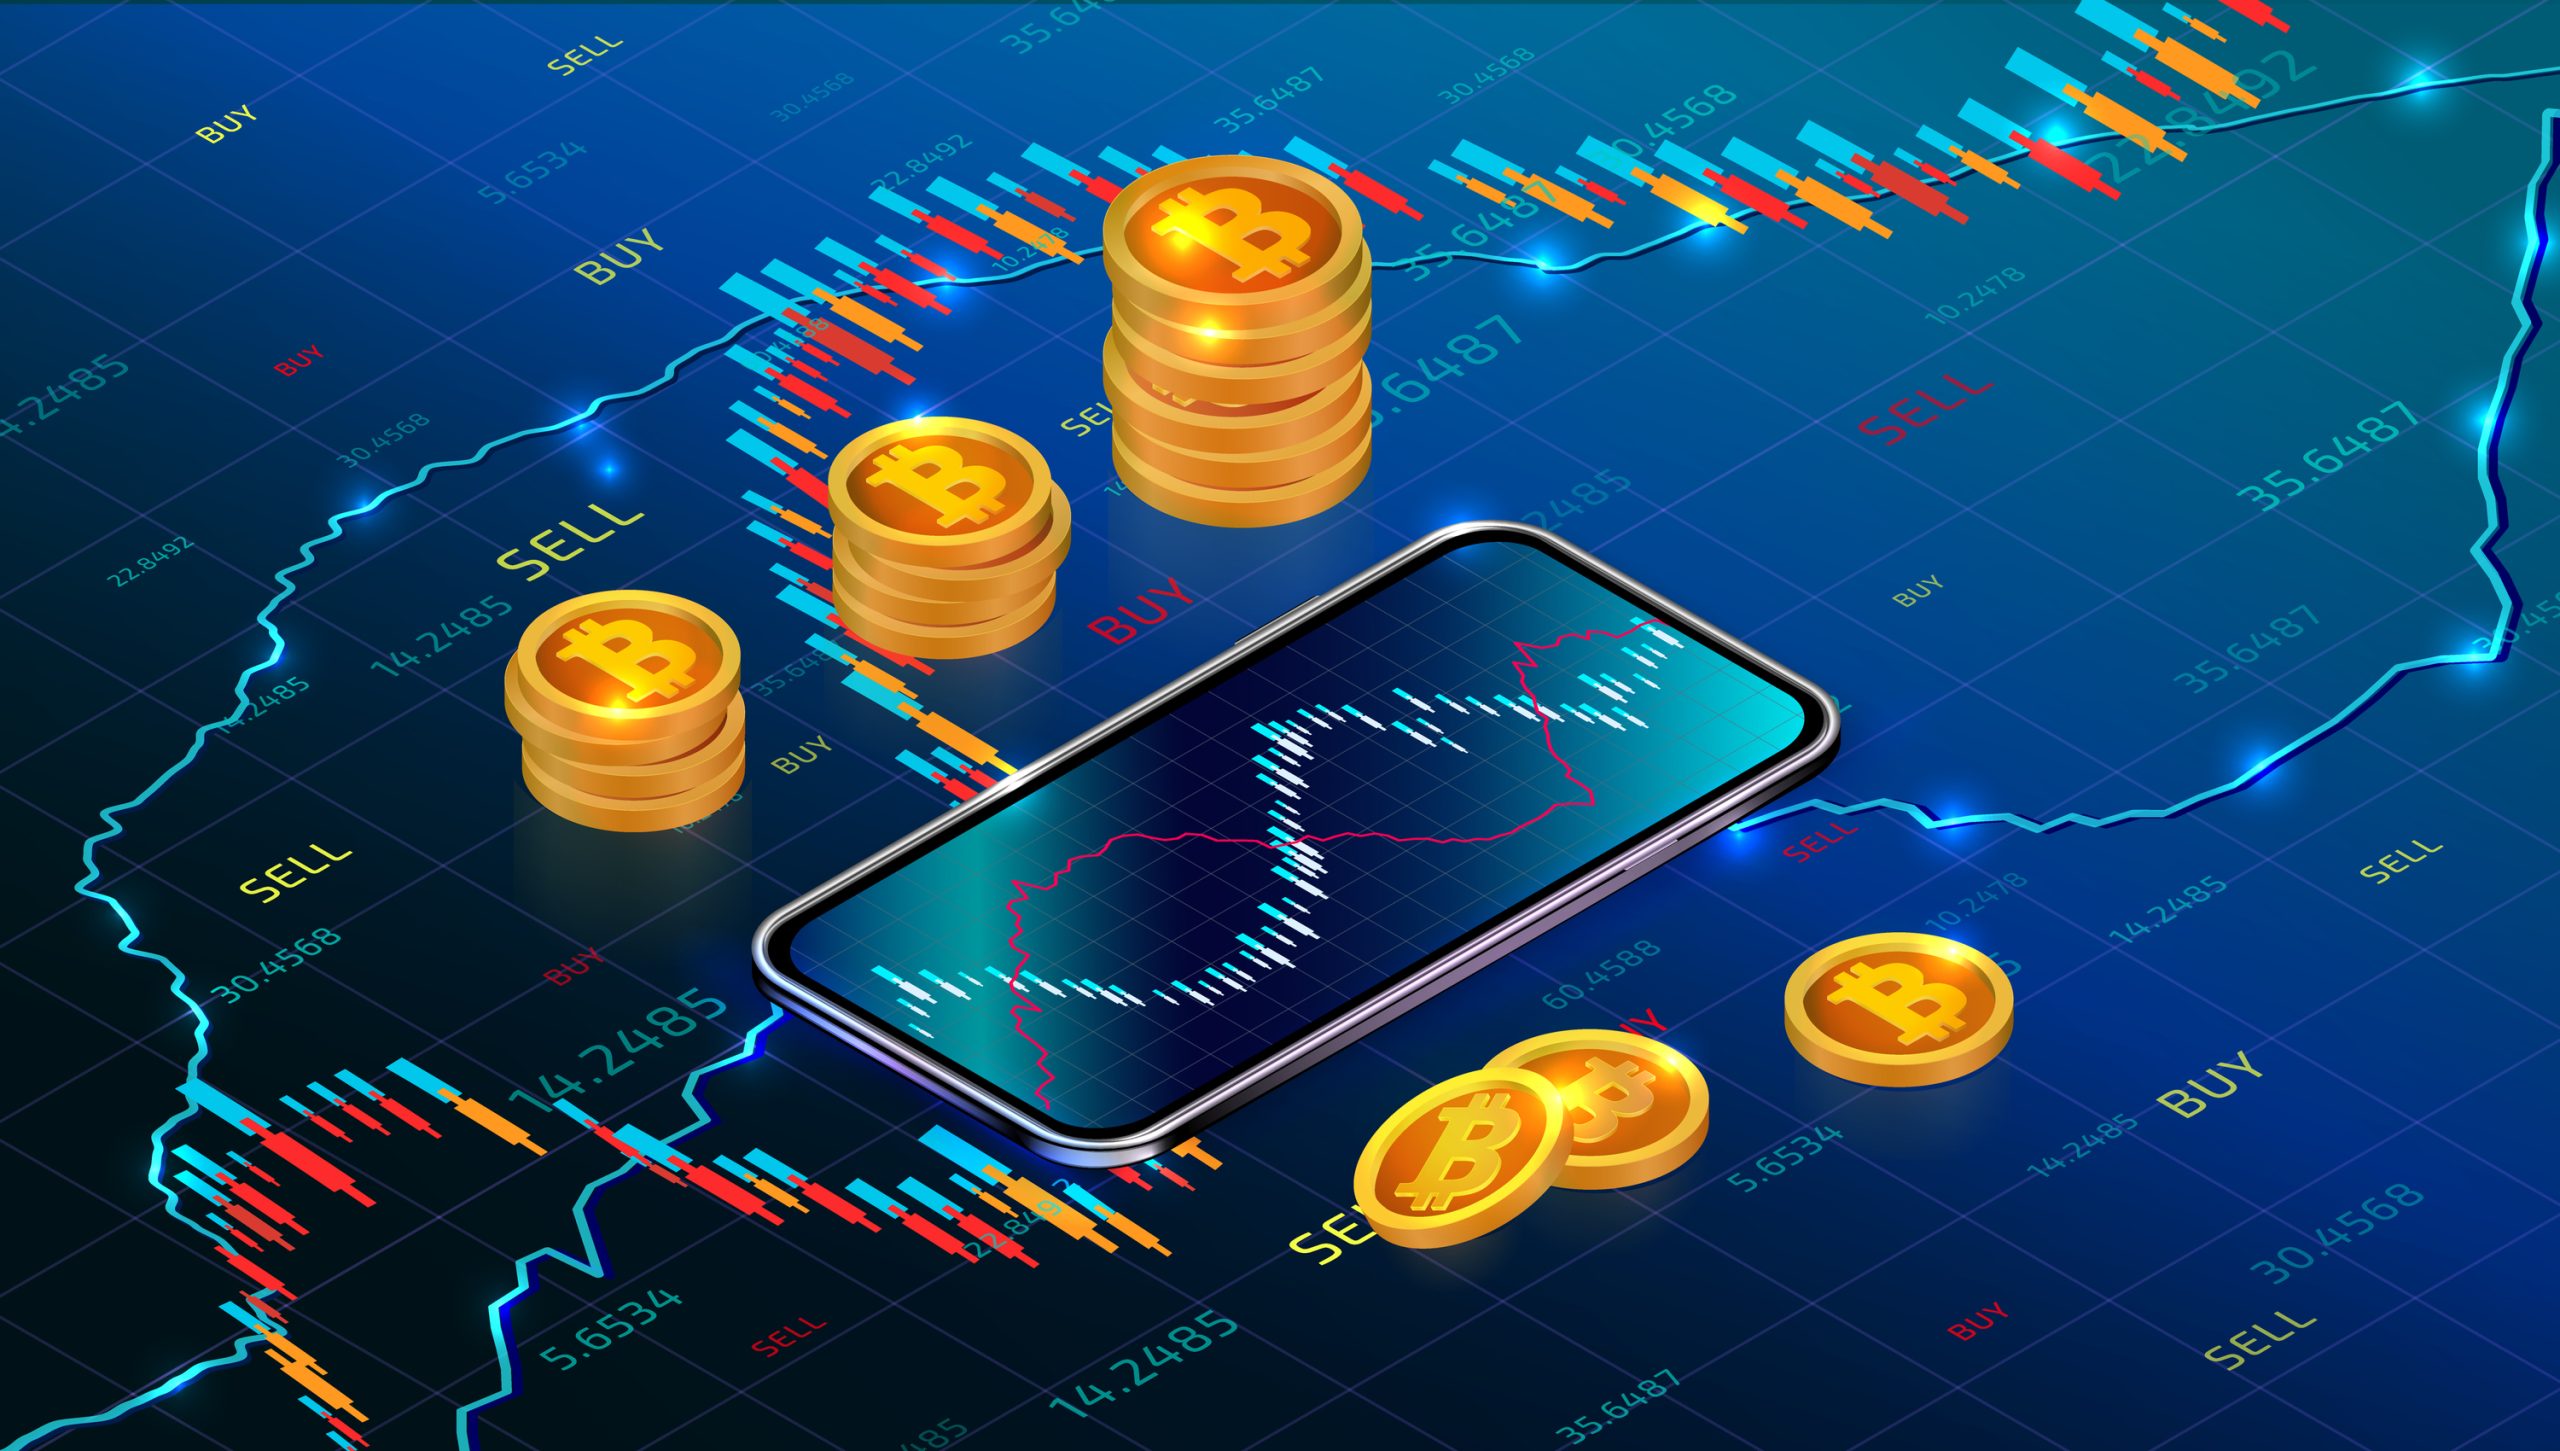 How do Trading Platforms Enable Automated Crypto Trading